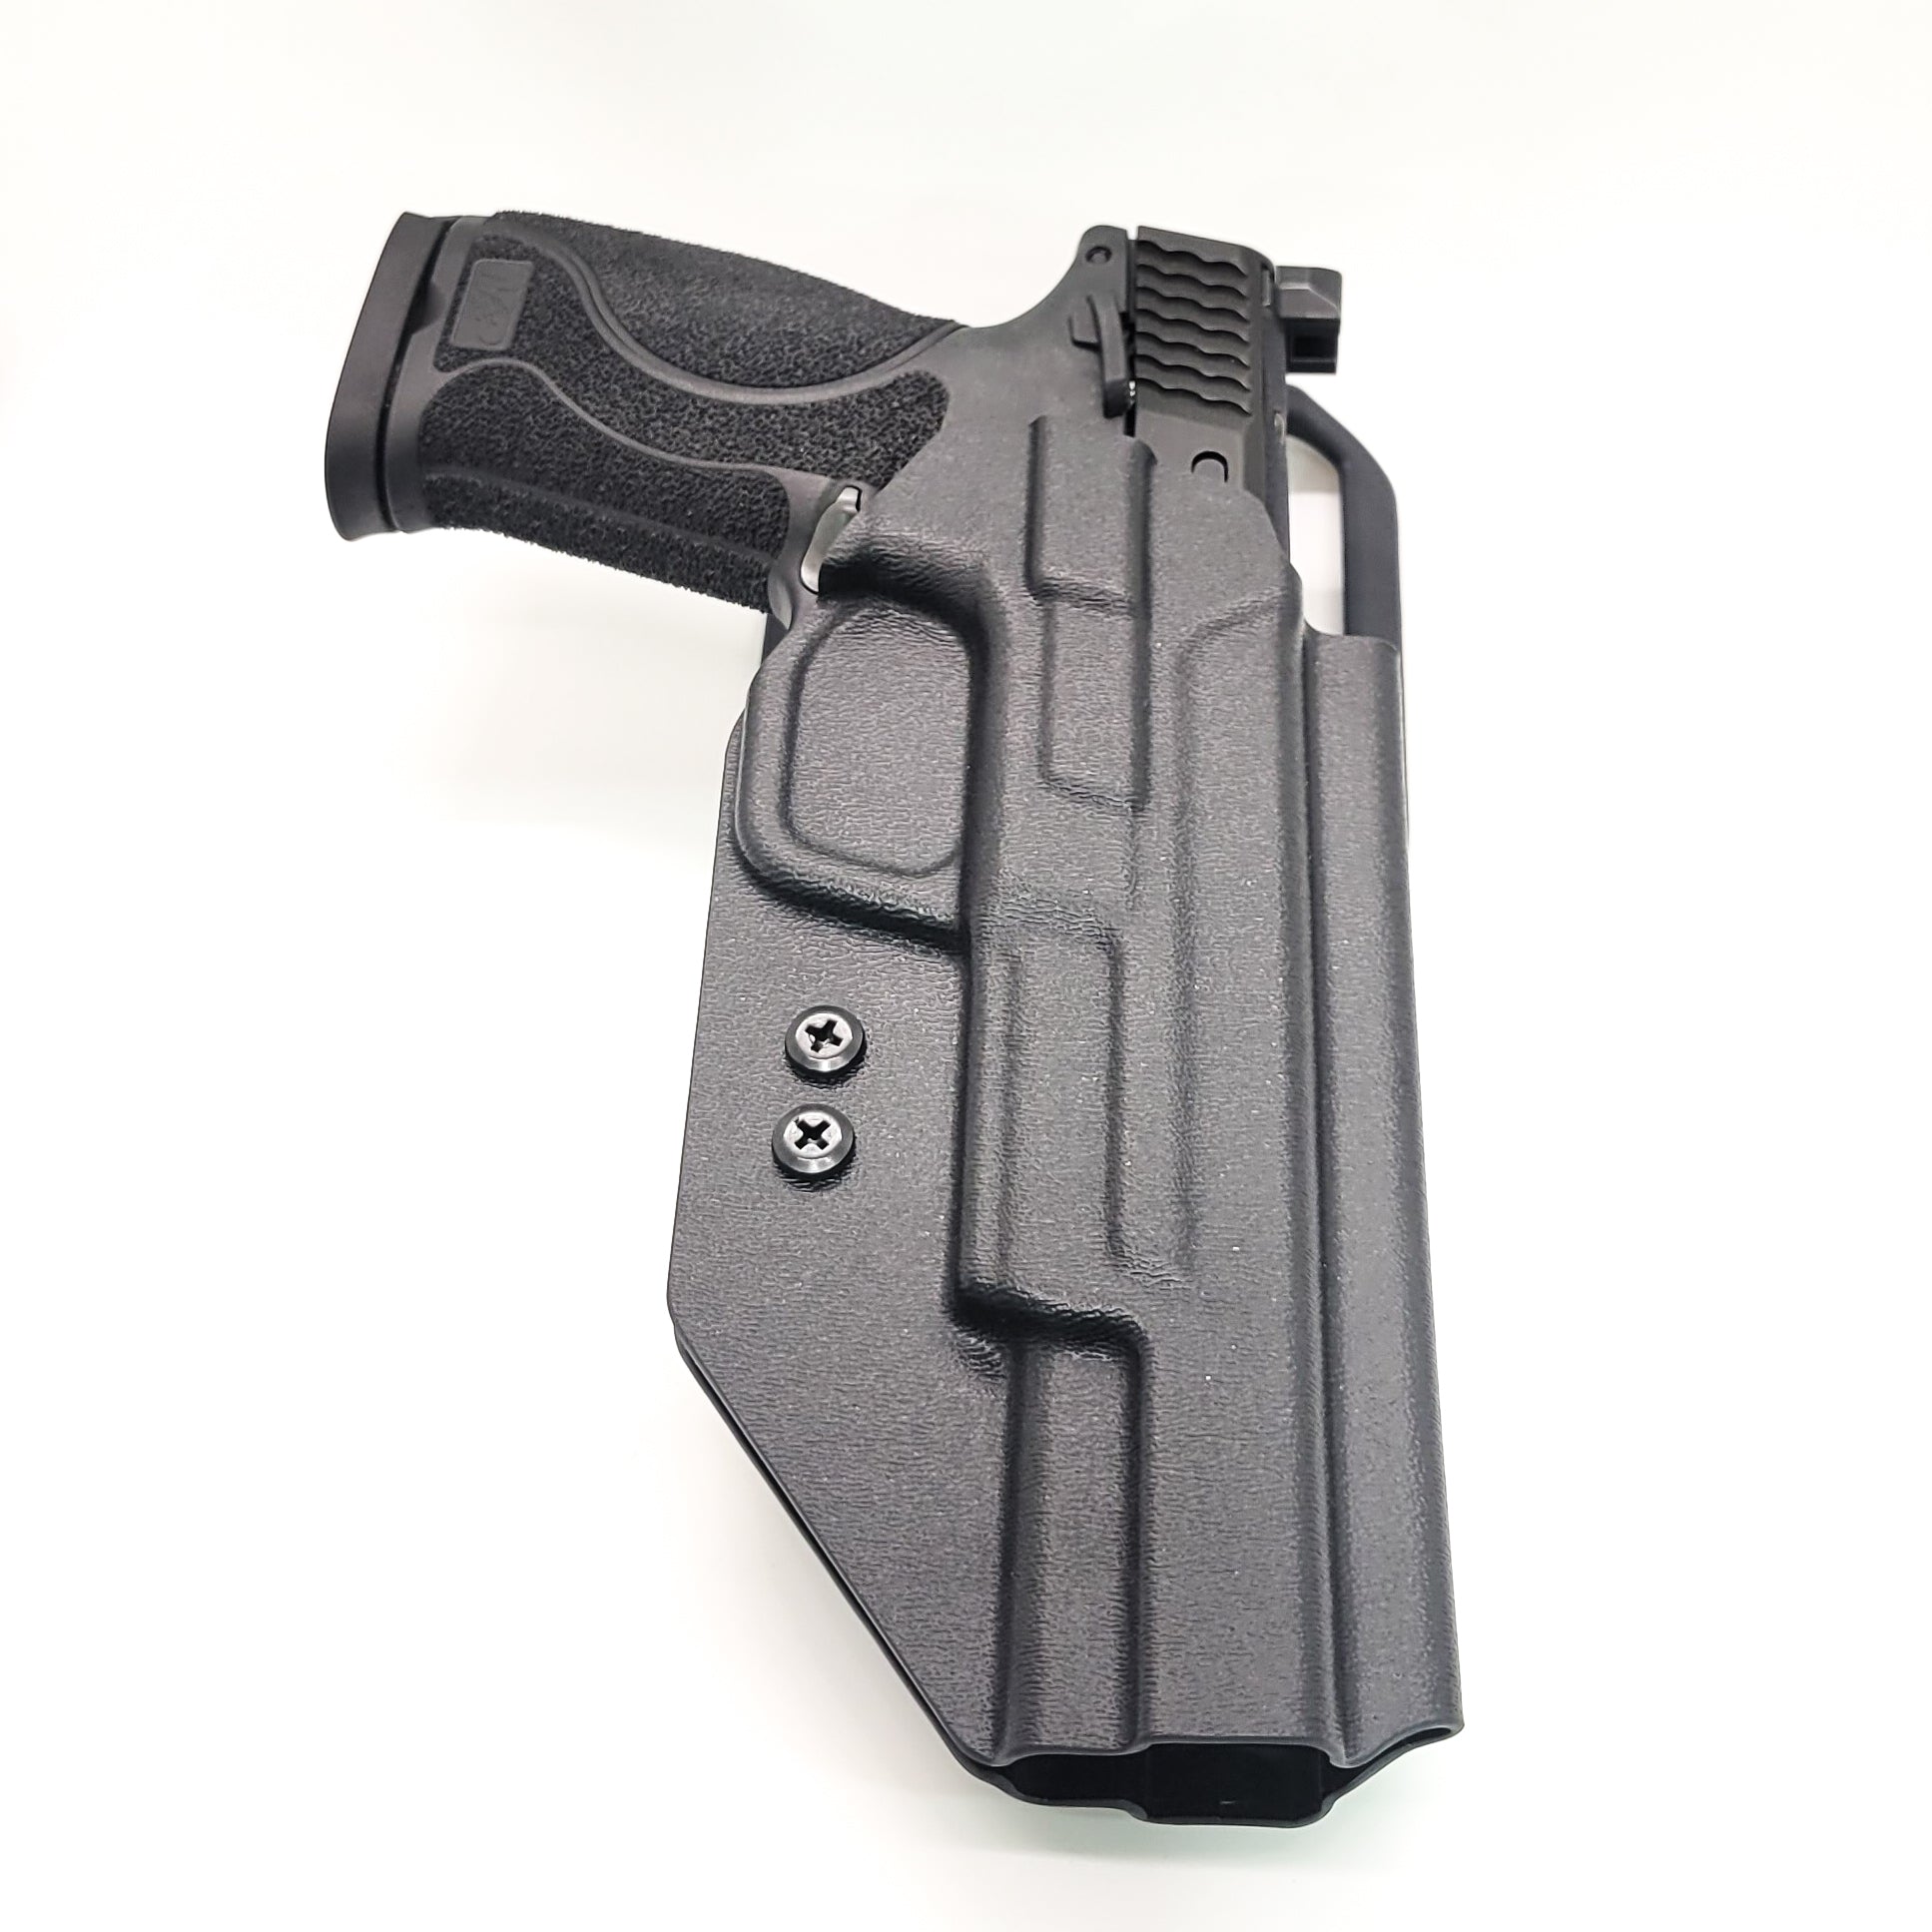 For the best OWB Outside Waistband Kydex Duty and Competition Holster designed to fit the Smith and Wesson M&P 10MM M2.0 4", 4.6", and Performance Center 5.6" pistols with or without the thumb safety Shop Four Brothers Holsters. Full sweat guard, adjustable retention, cleared for a red dot sight. Made in USA